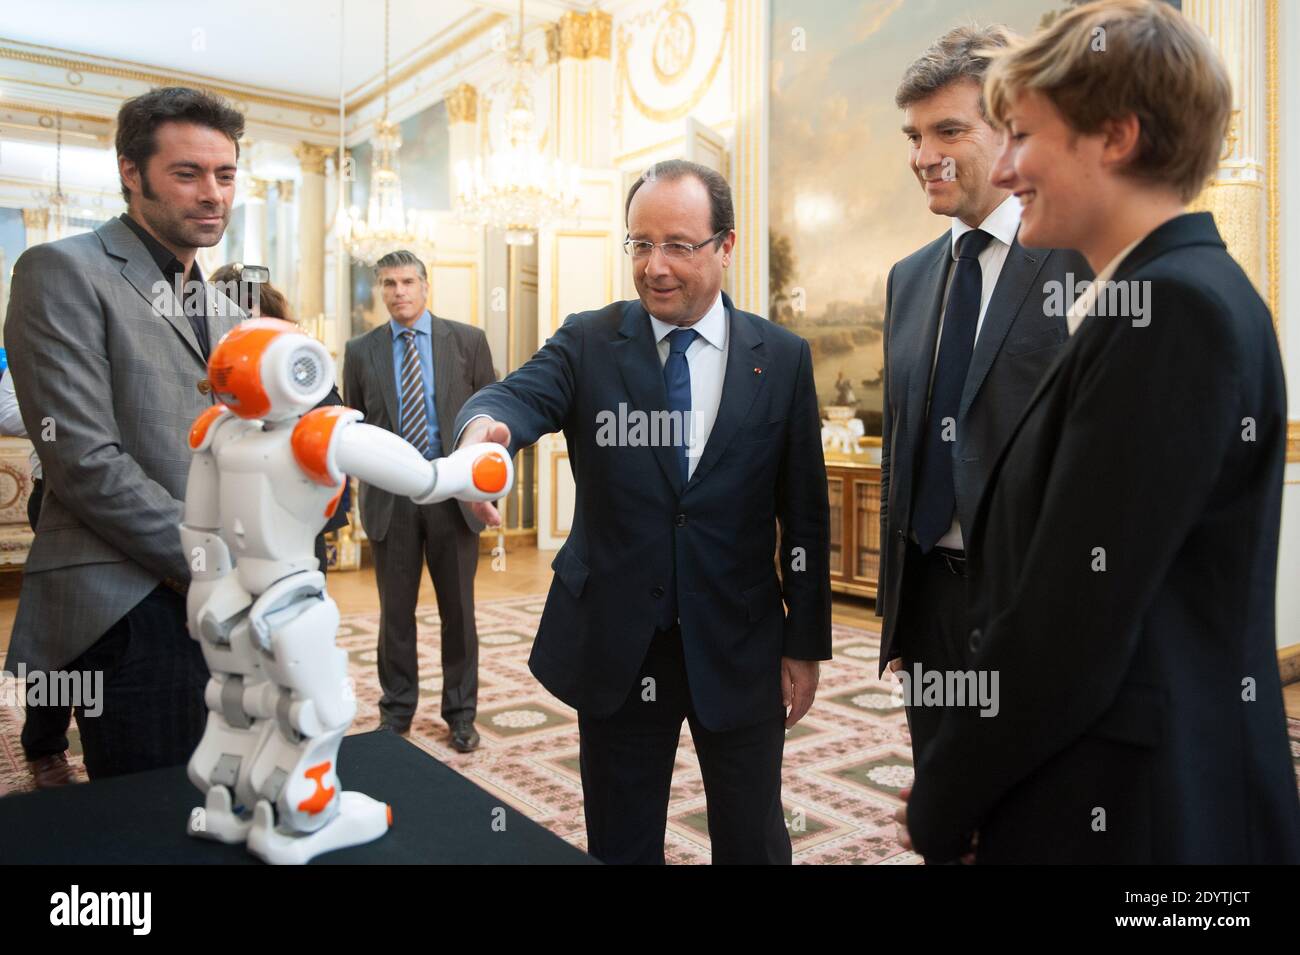 France's President Francois Hollande holds an humanoid robot 'Nao' from Aldebaran Robotics company as he visits an exhibition on French industrial design and technology at the Elysee Palace in Paris, France on September 12, 2013. At R, French Minister for Industrial Recovery Arnaud Montebourg. Photo by Thierry Orban/ABACAPRESS.COM Stock Photo